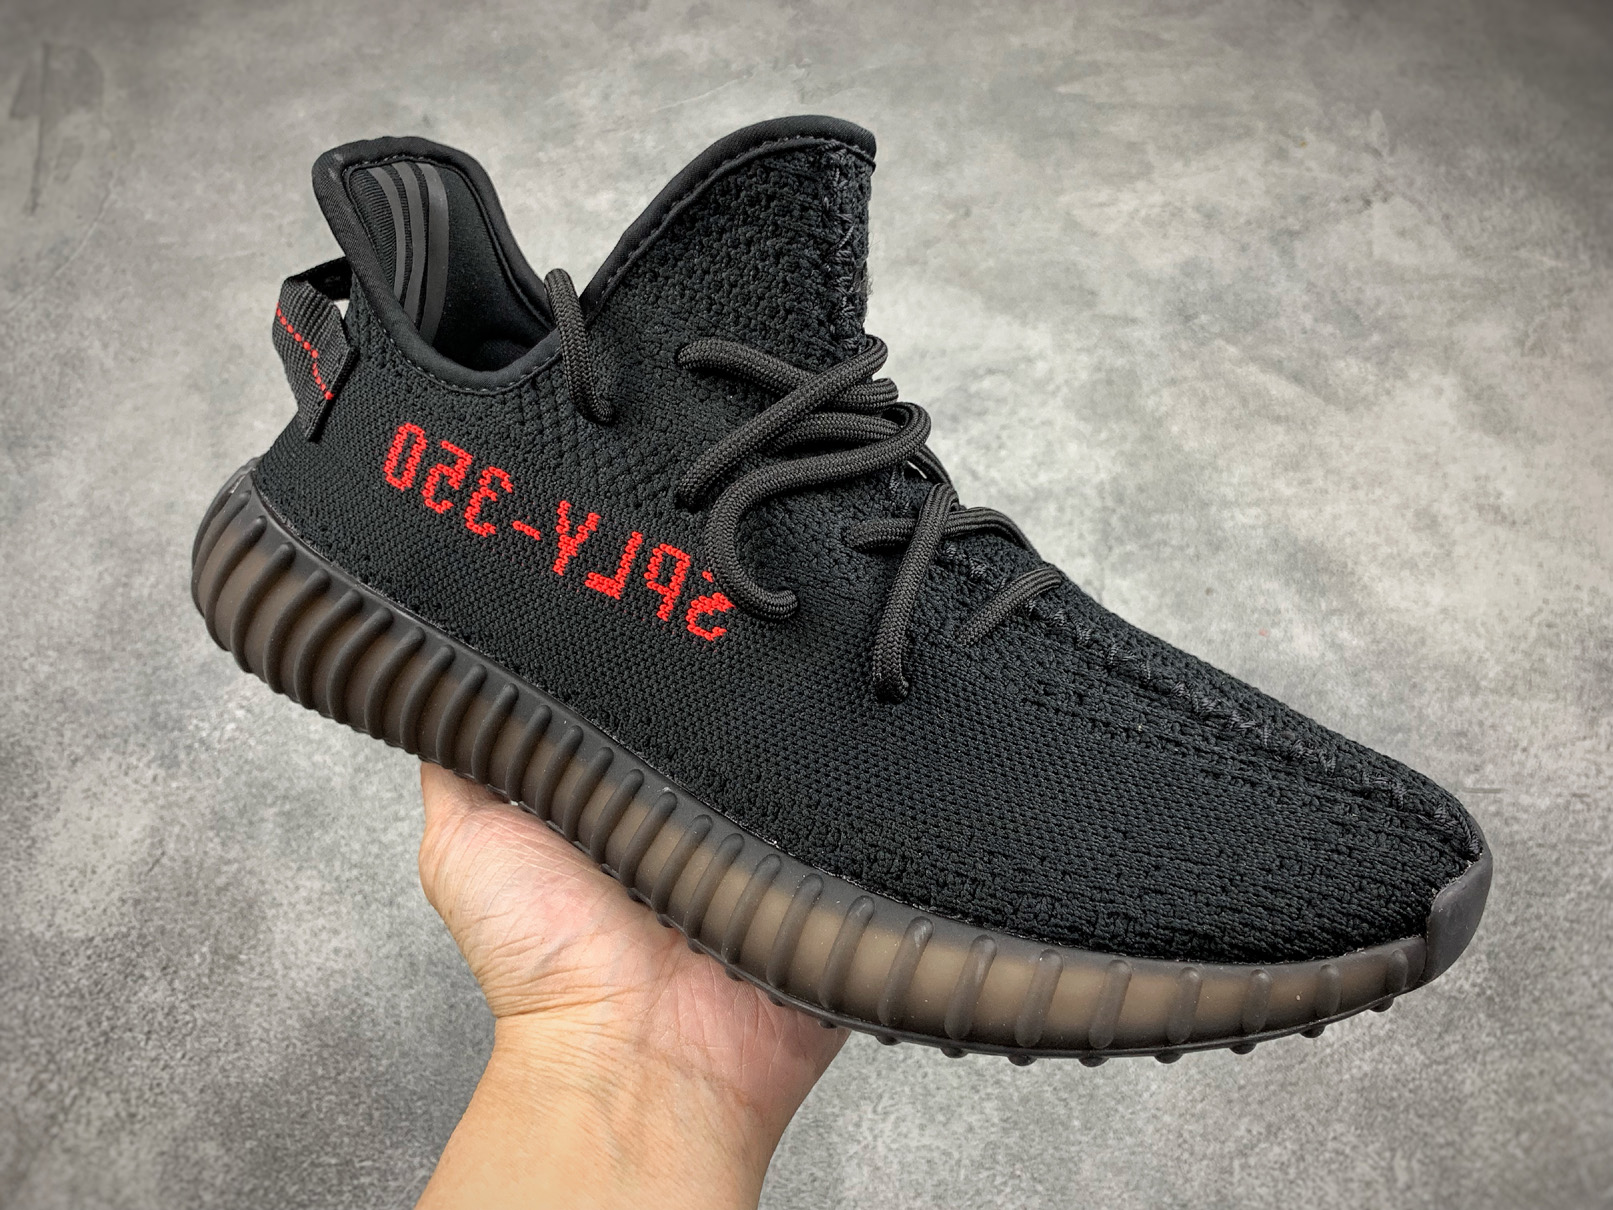 fake yeezys red and black